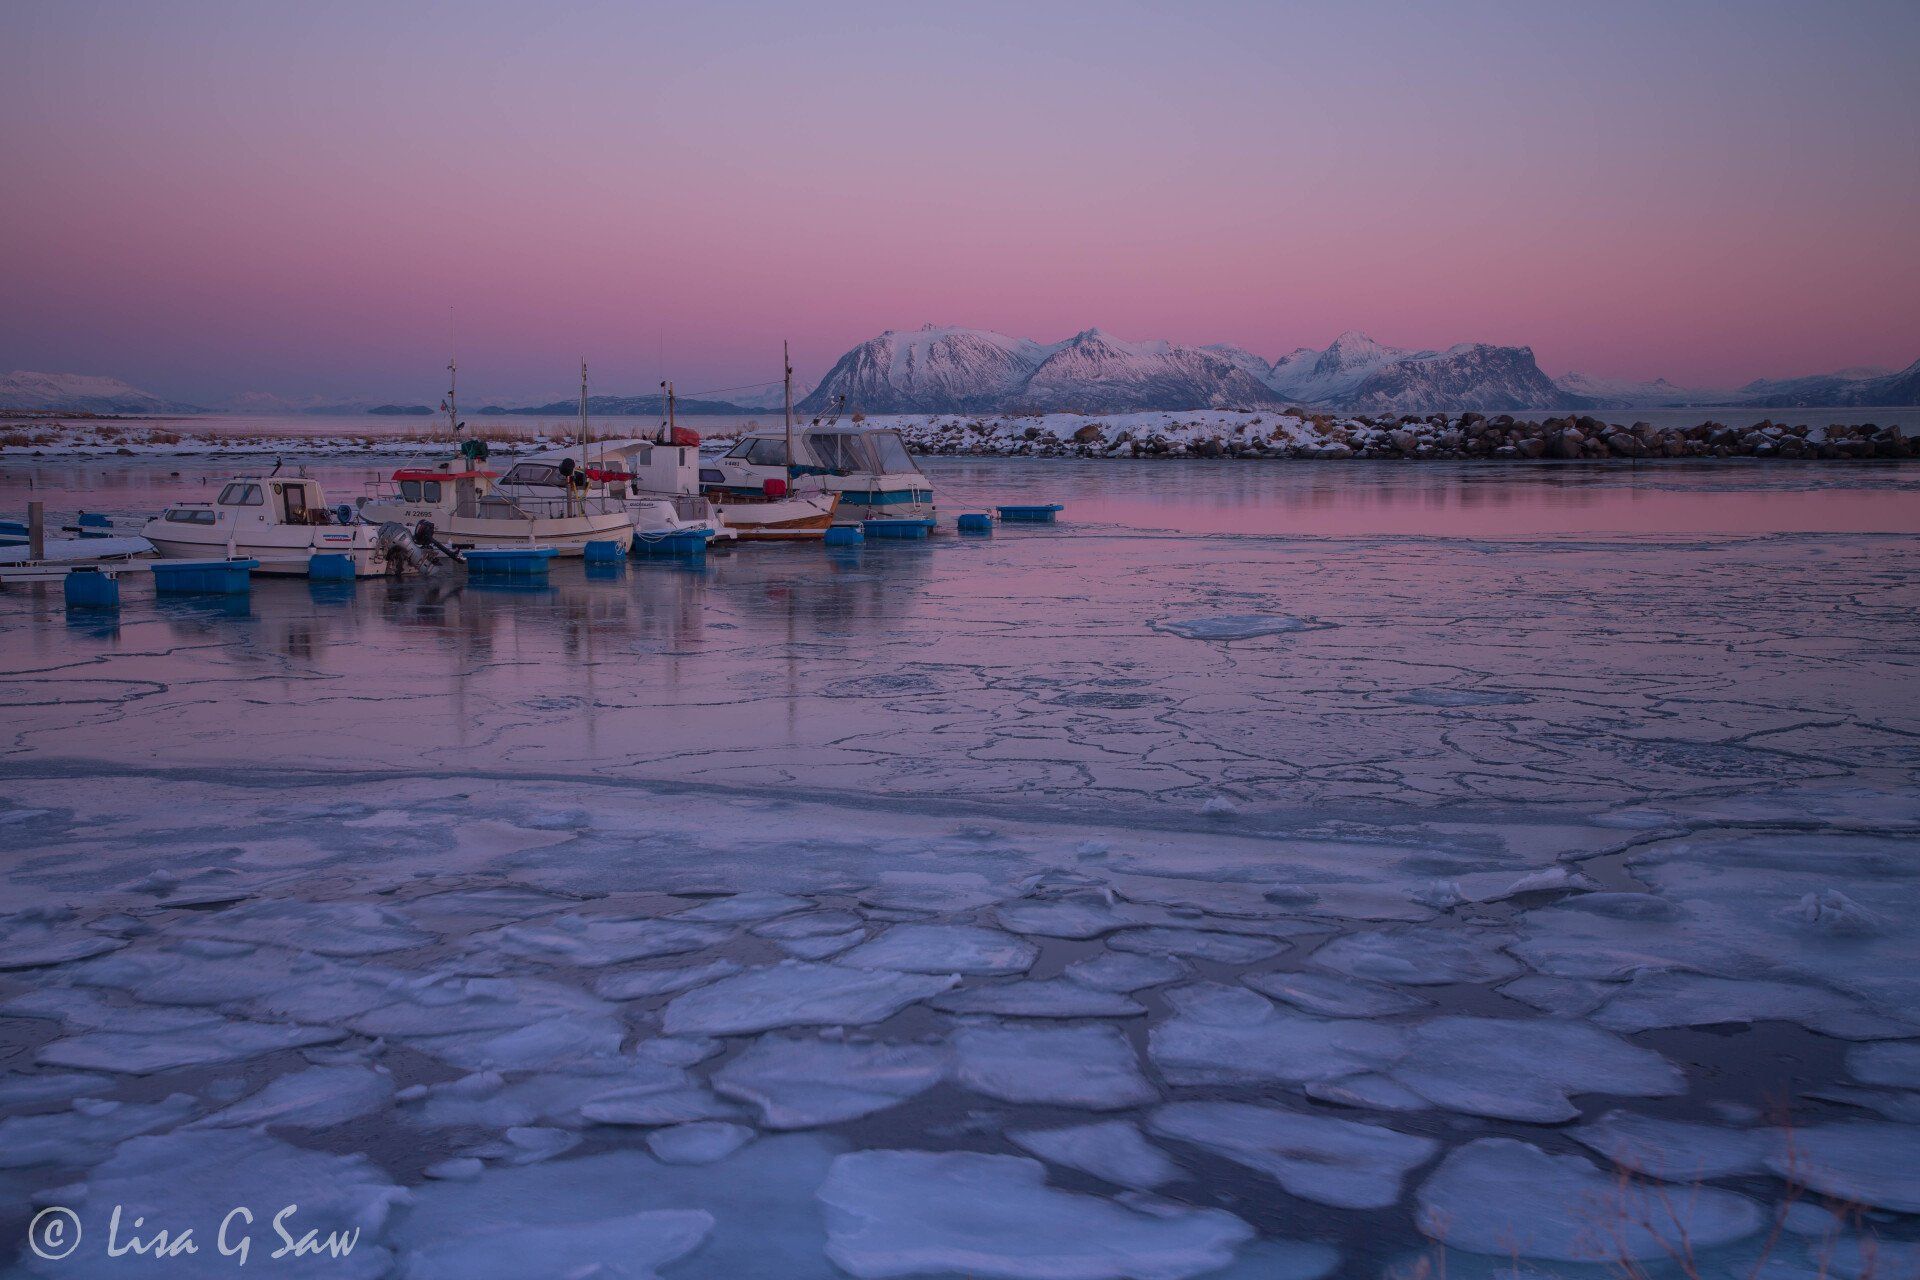 Boats by jetty and broken ice on water with mountains